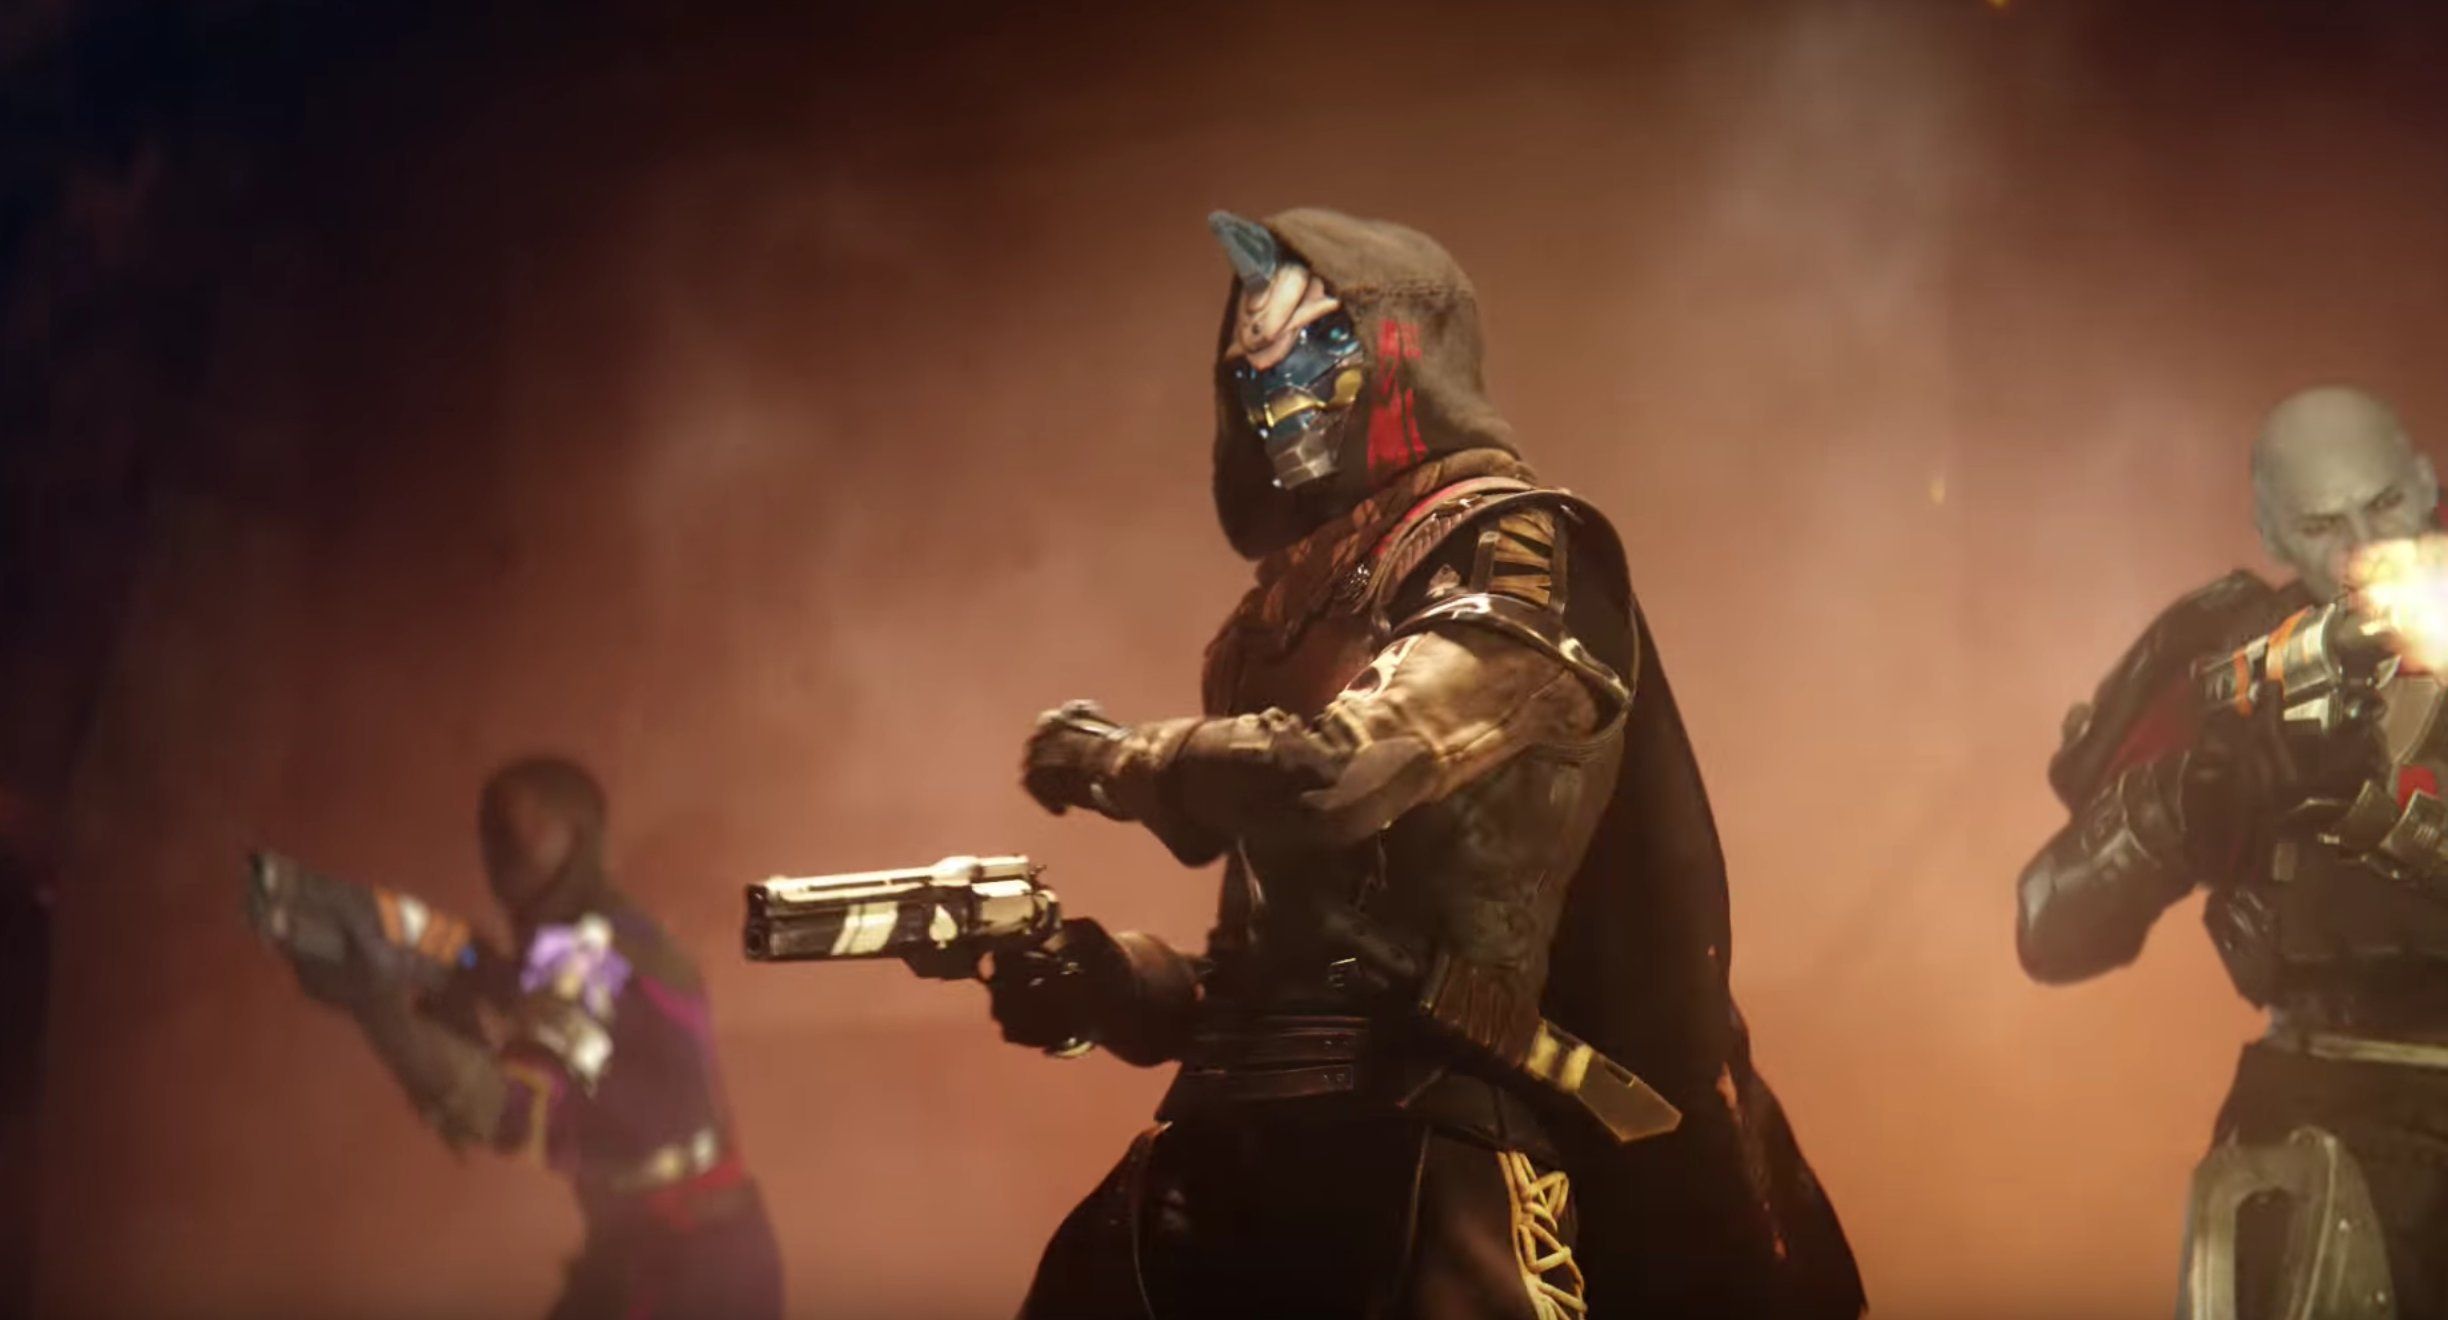 Cayde-6 leads the Vanguard in defending the Tower from the Red Legion.